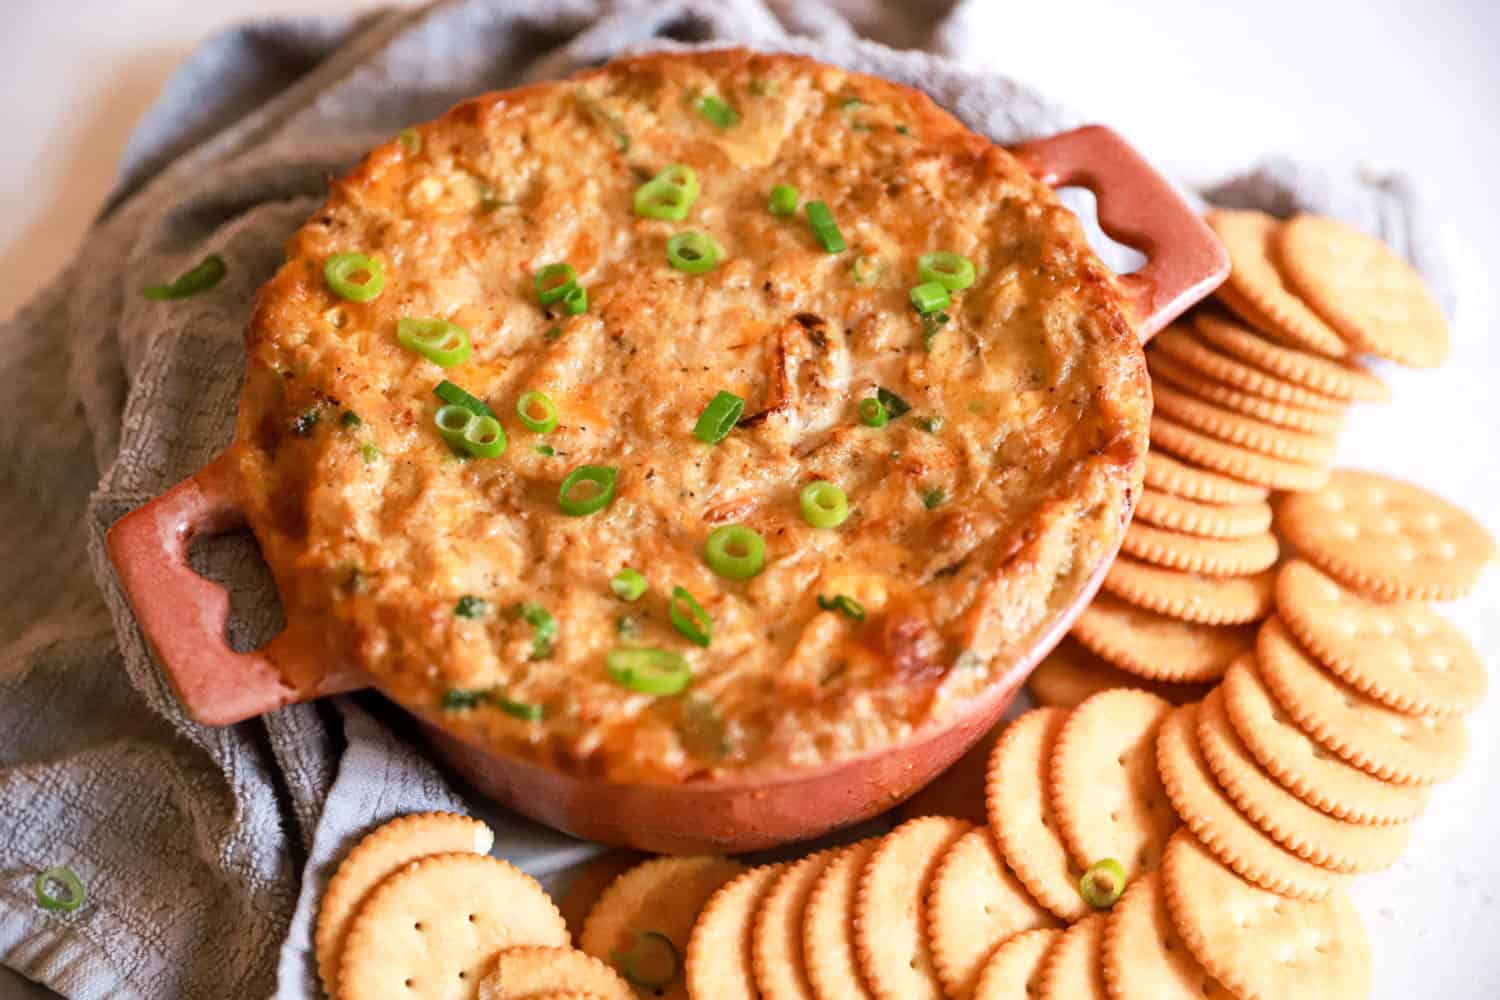 Round baking dish of hot crab dip surrounded by Ritz crackers.